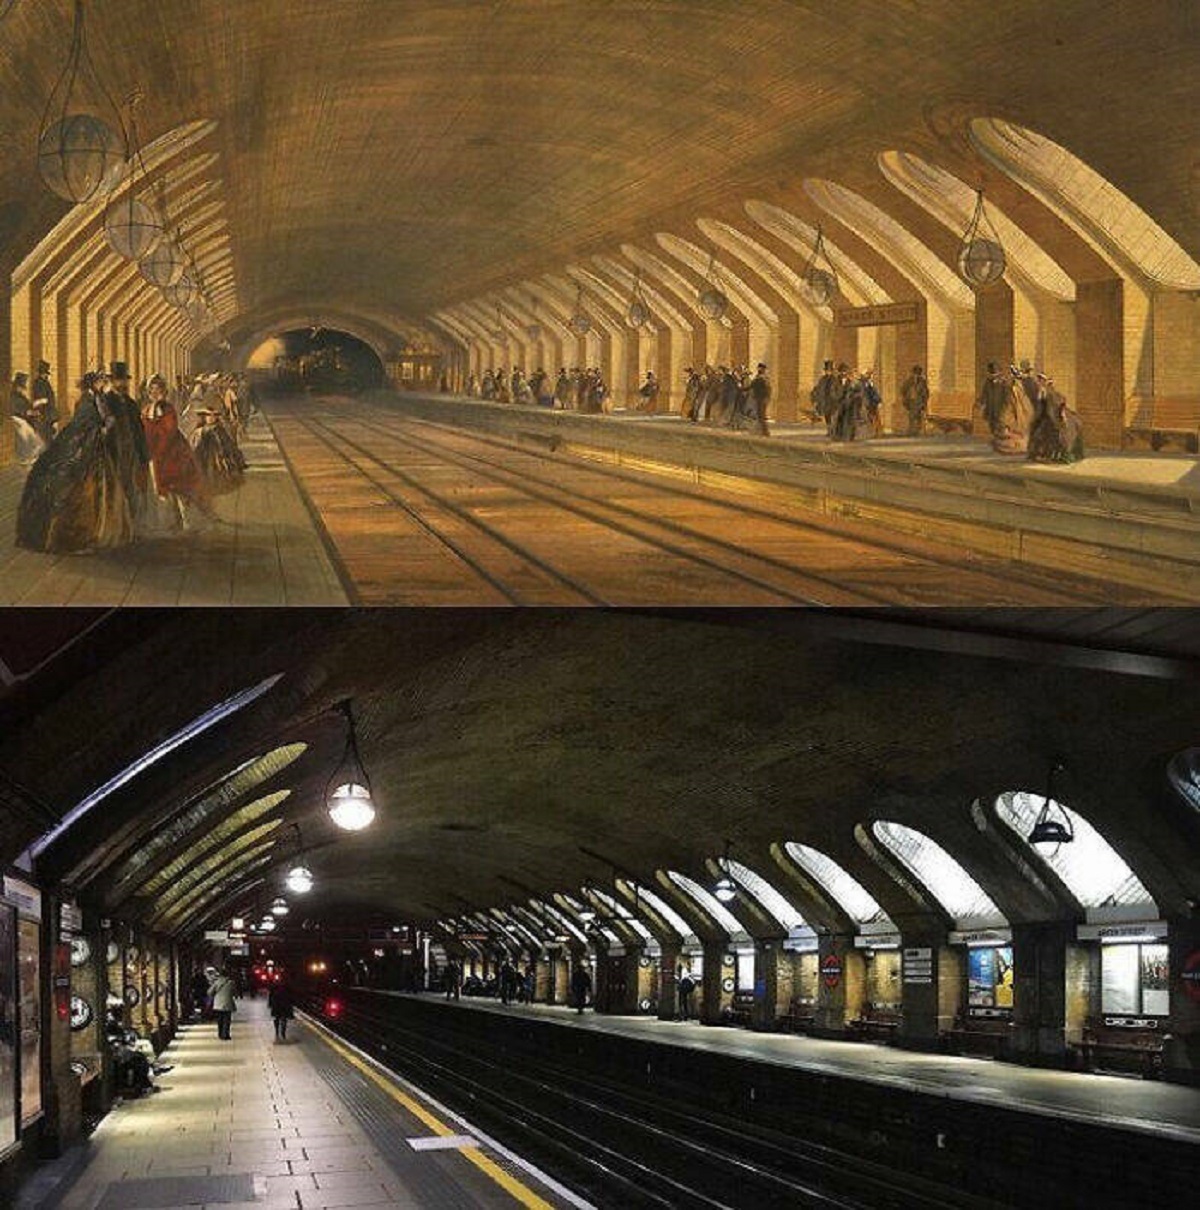 "The World's Oldest Undeground Station, Baker Street, England. 157 Years Apart"